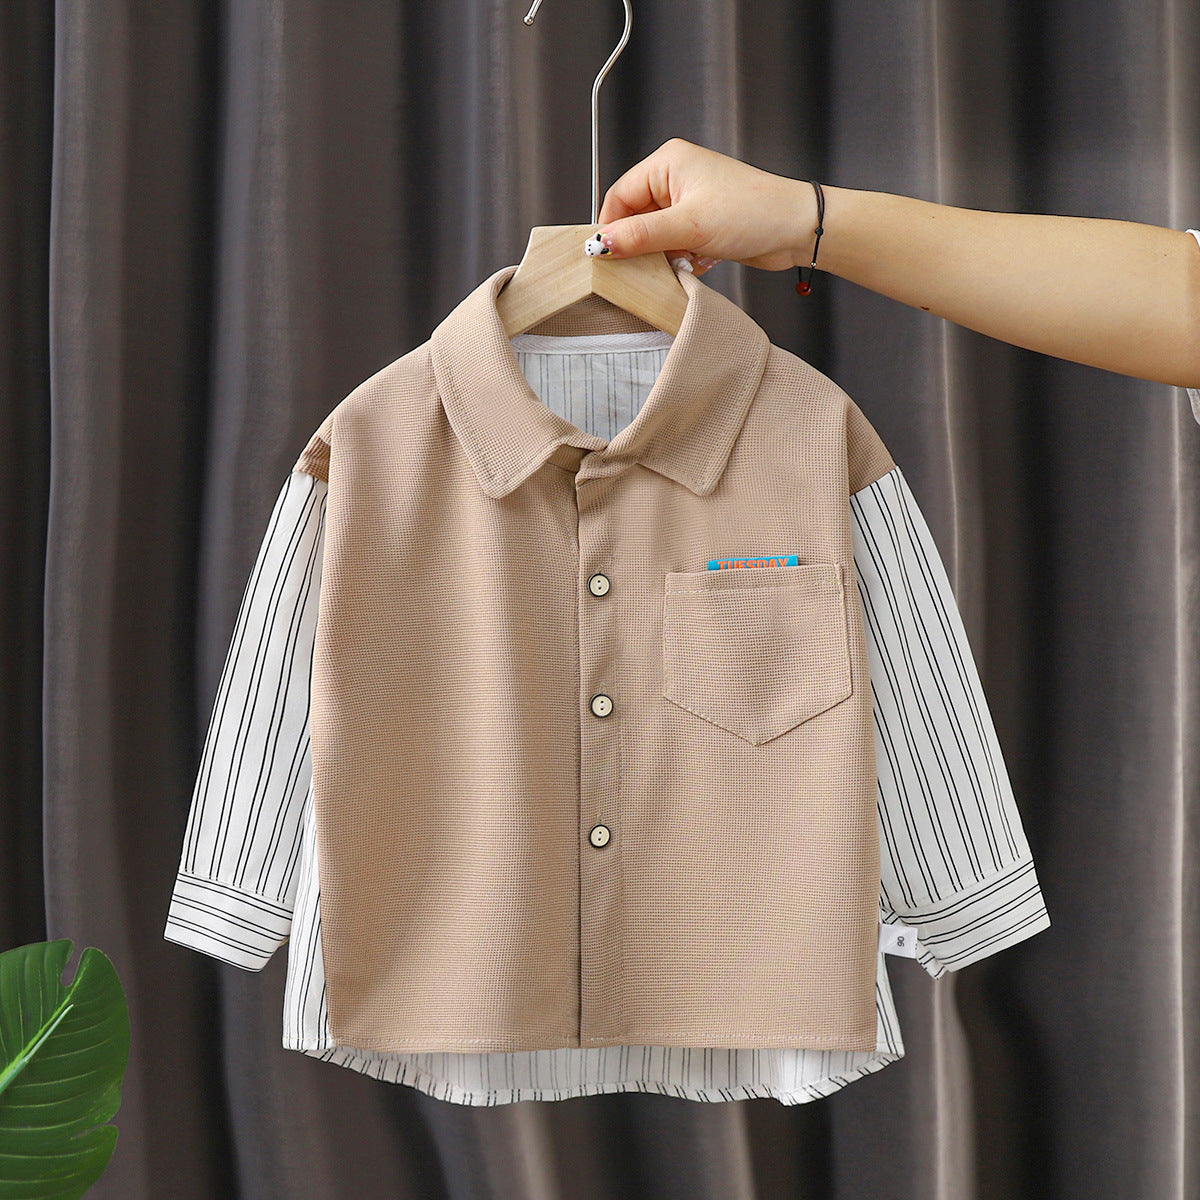 Boys' Long Sleeve Shirt - New Spring Collection for Children, White Dress Shirt for Infants and Toddlers, Perfect for Autumn